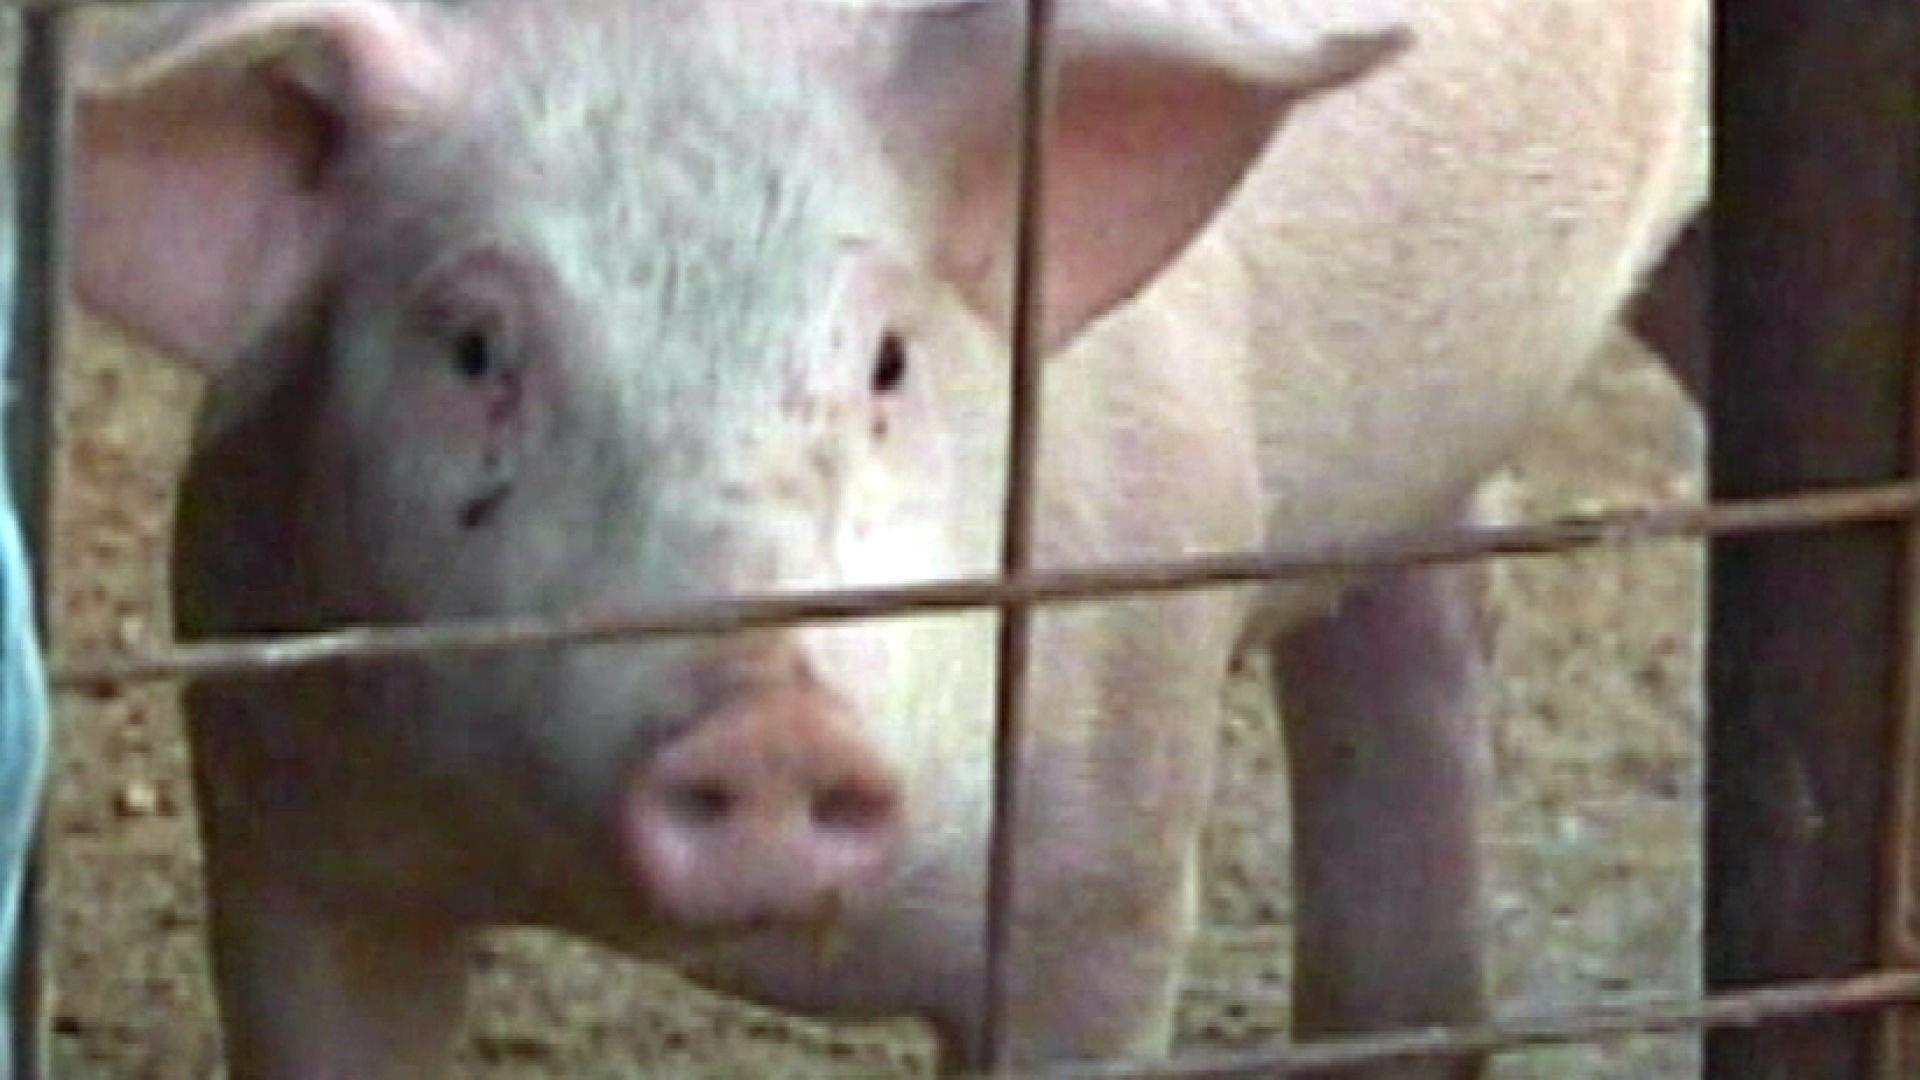 Japan To Allow Pig-To-Human Transplants by 2019